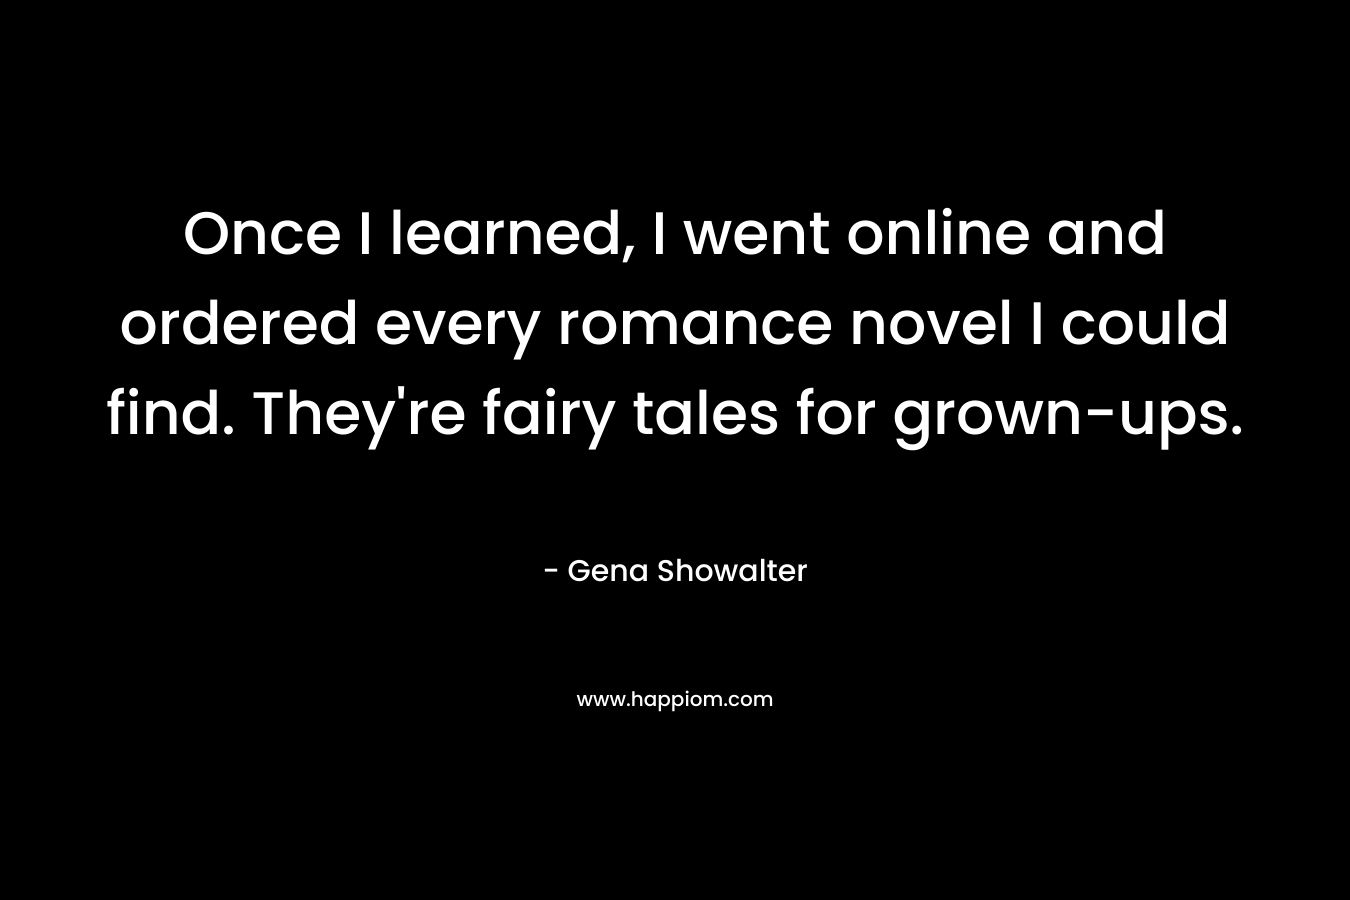 Once I learned, I went online and ordered every romance novel I could find. They're fairy tales for grown-ups.